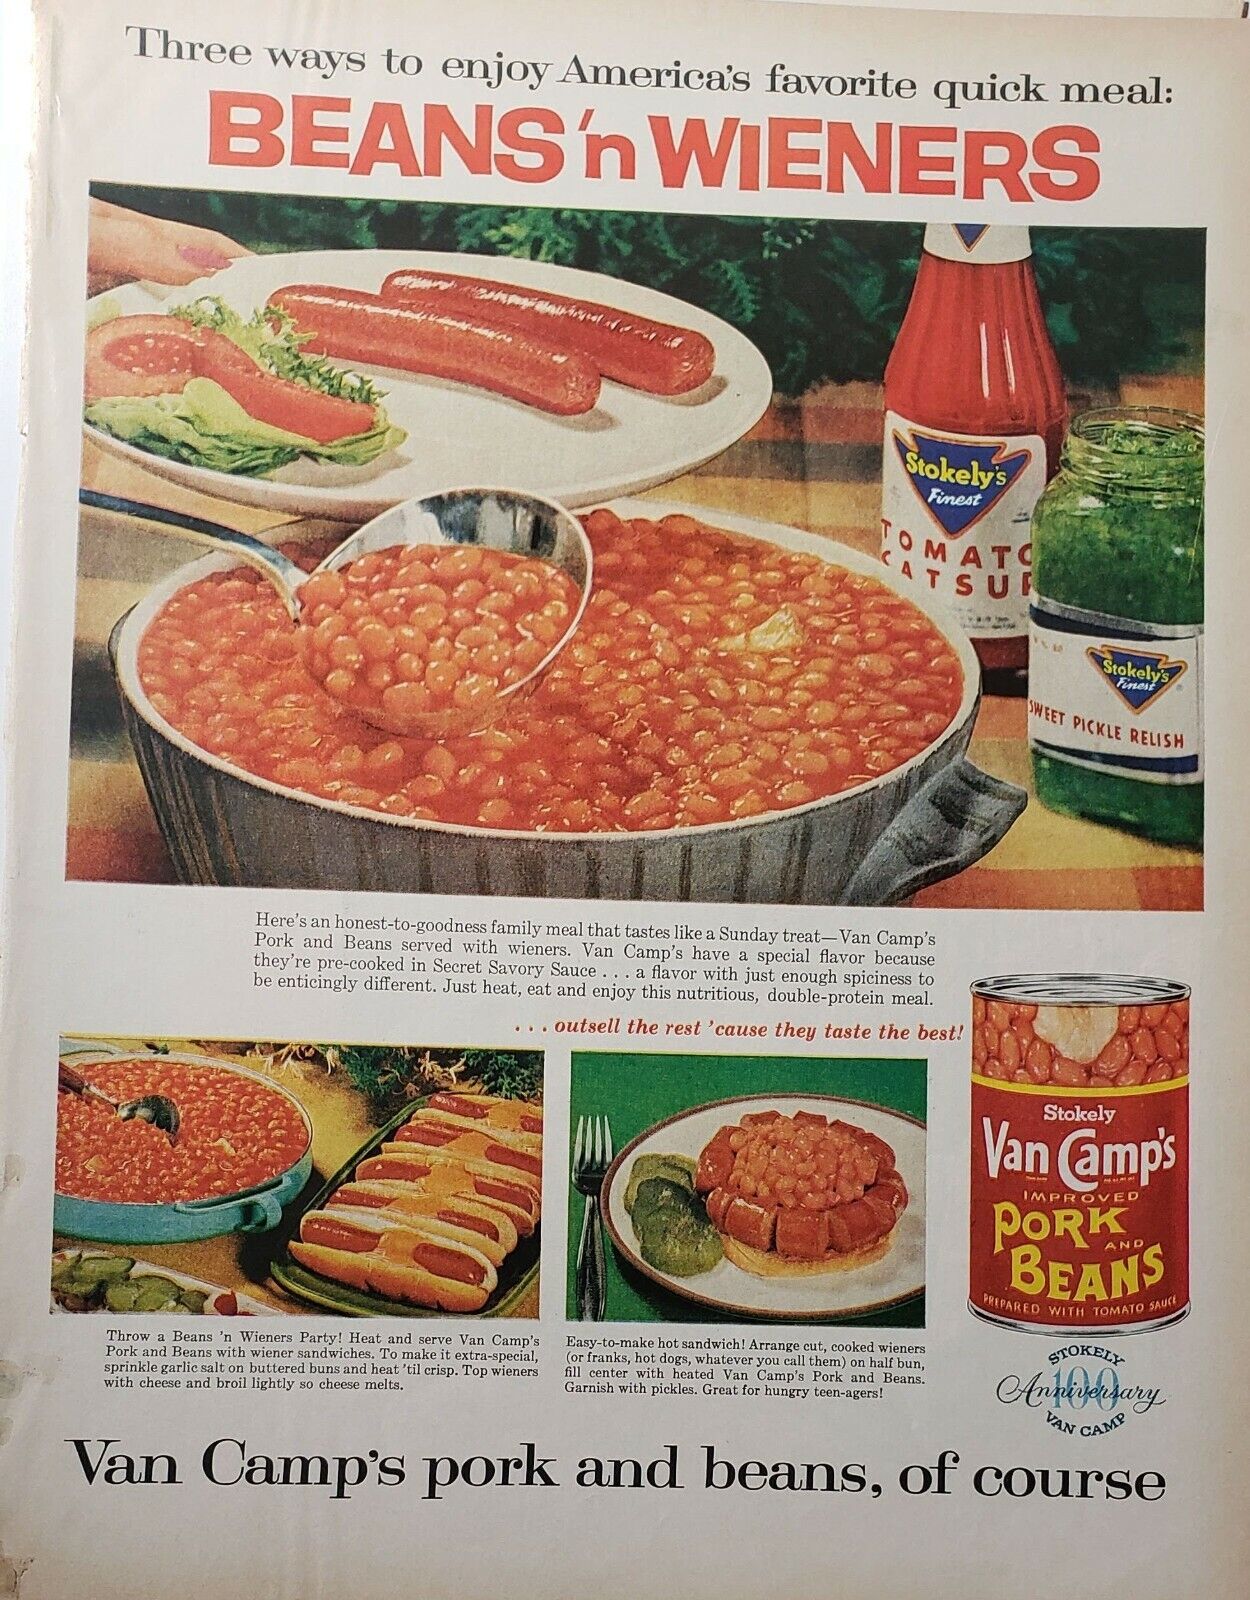 Lot of 3 Vintage 1961 Stokely Van Camps Baked Beans Print Ads 